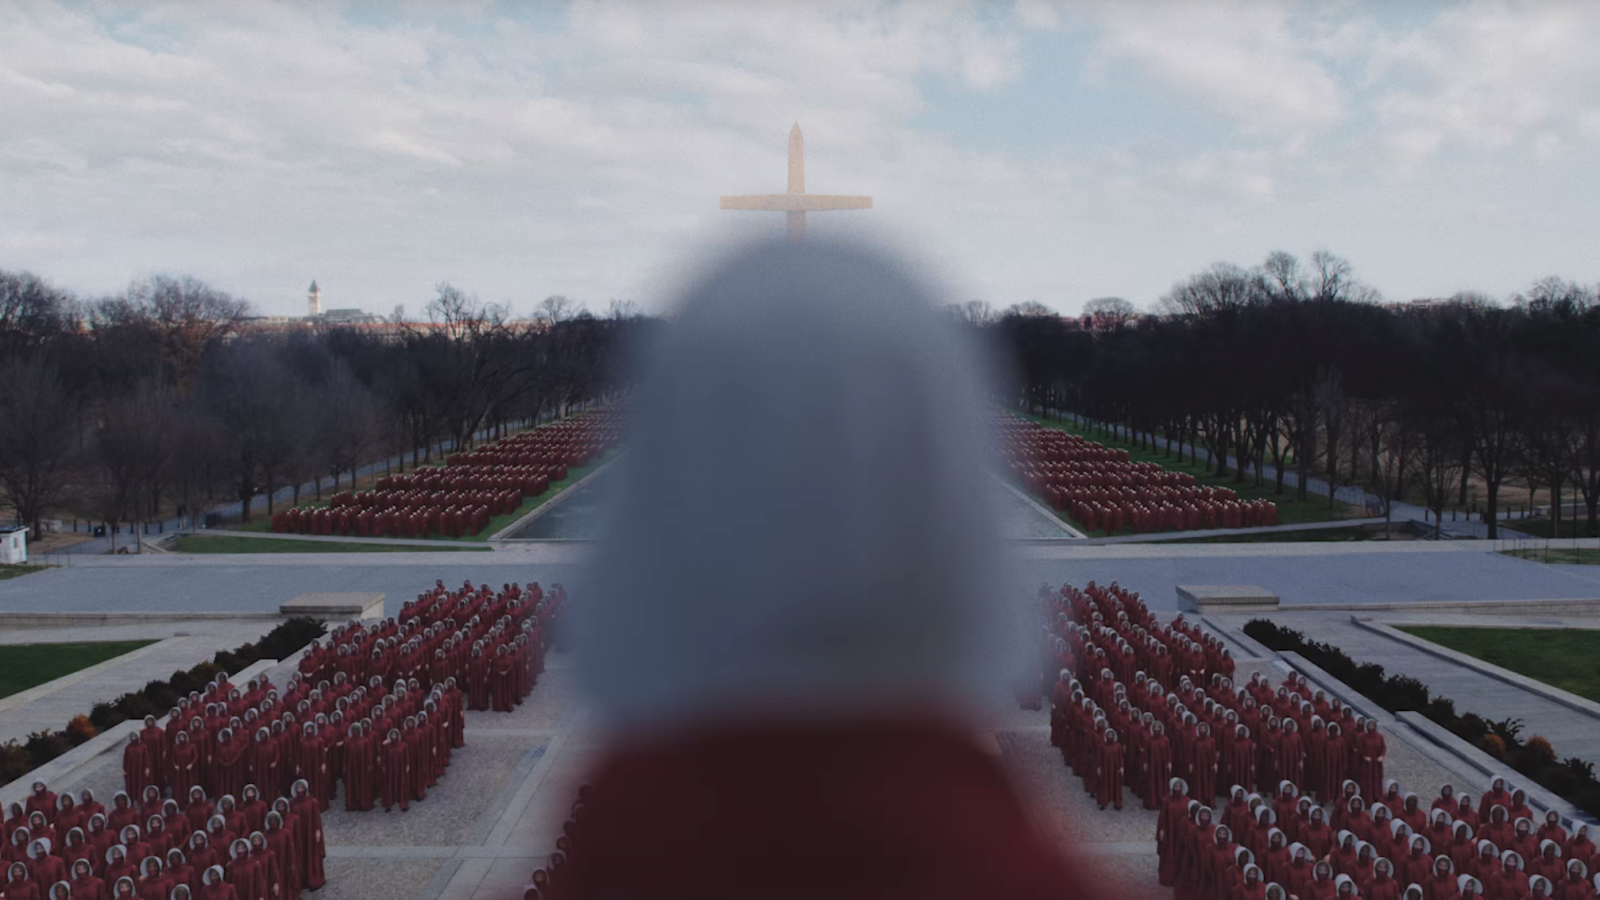 Free download The First for Handmaids Tale Season 3 Takes Us Back to Gilead [1600x900] for your Desktop, Mobile & Tablet. Explore Handmaid's Tale Season 3 Wallpaper